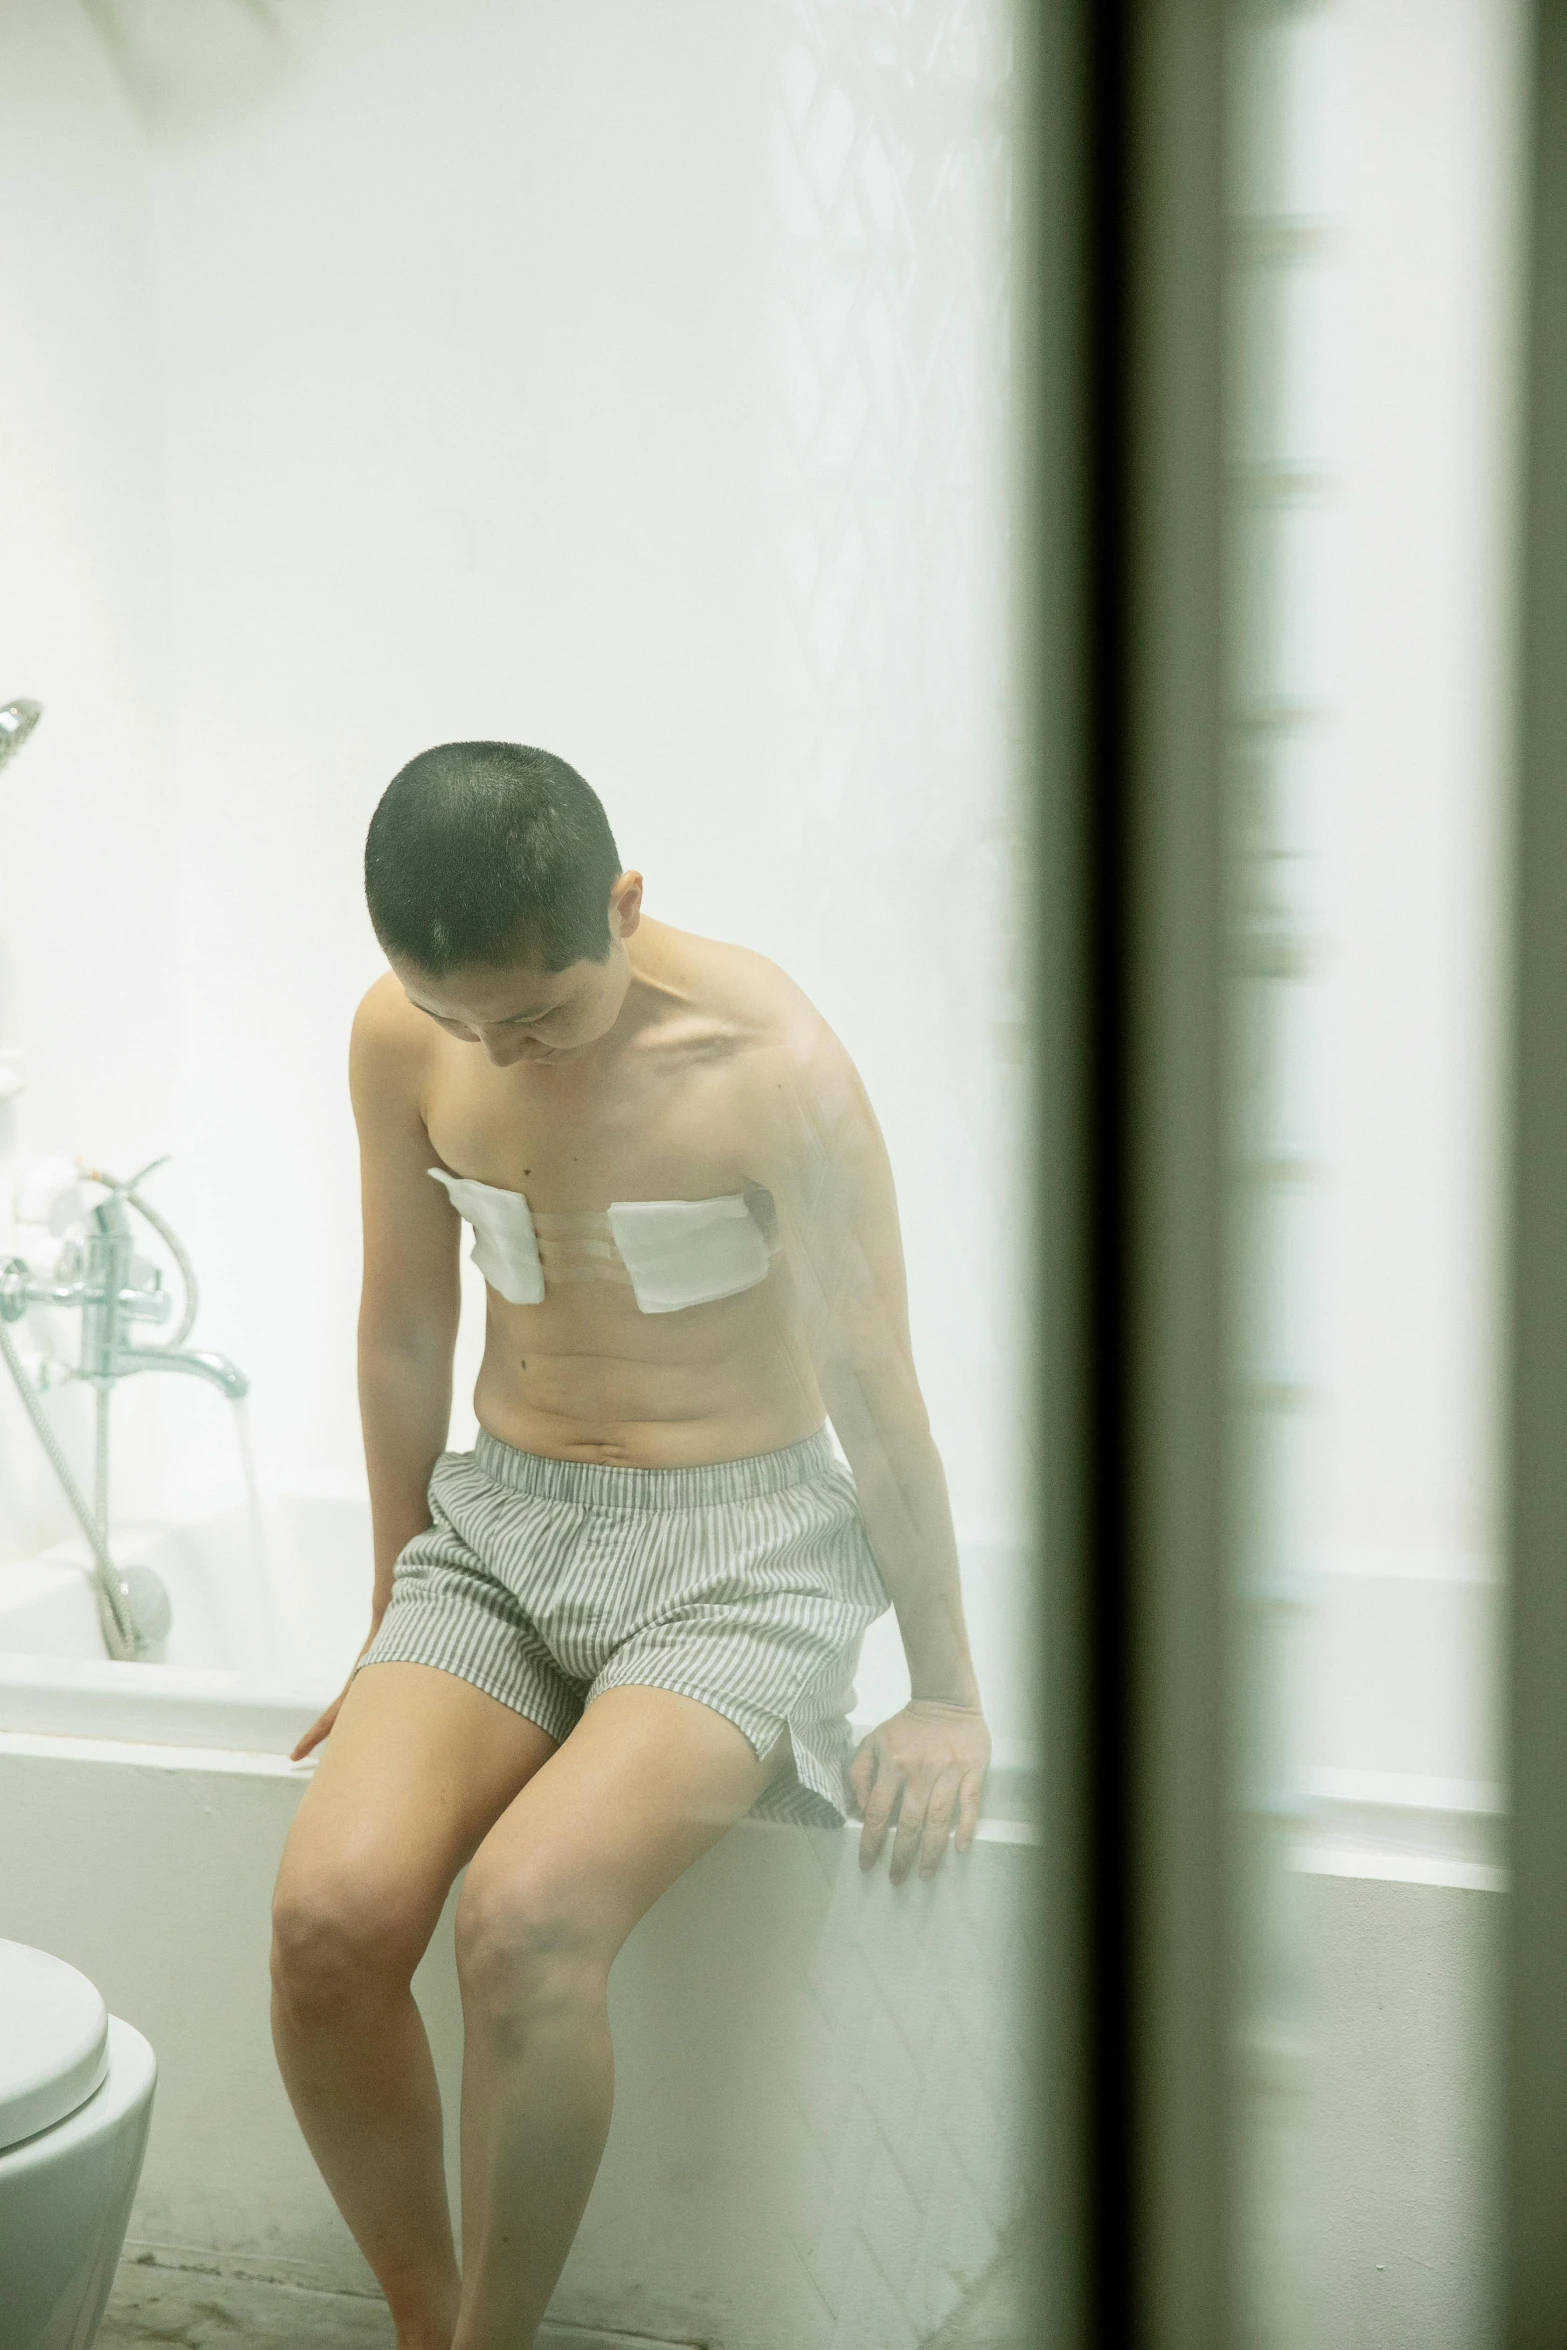 a man sitting on the edge of a bathtub next to a toilet, inspired by Zhang Kechun, happening, battle scars across body, wearing translucent sheet, teenage boy, medical image